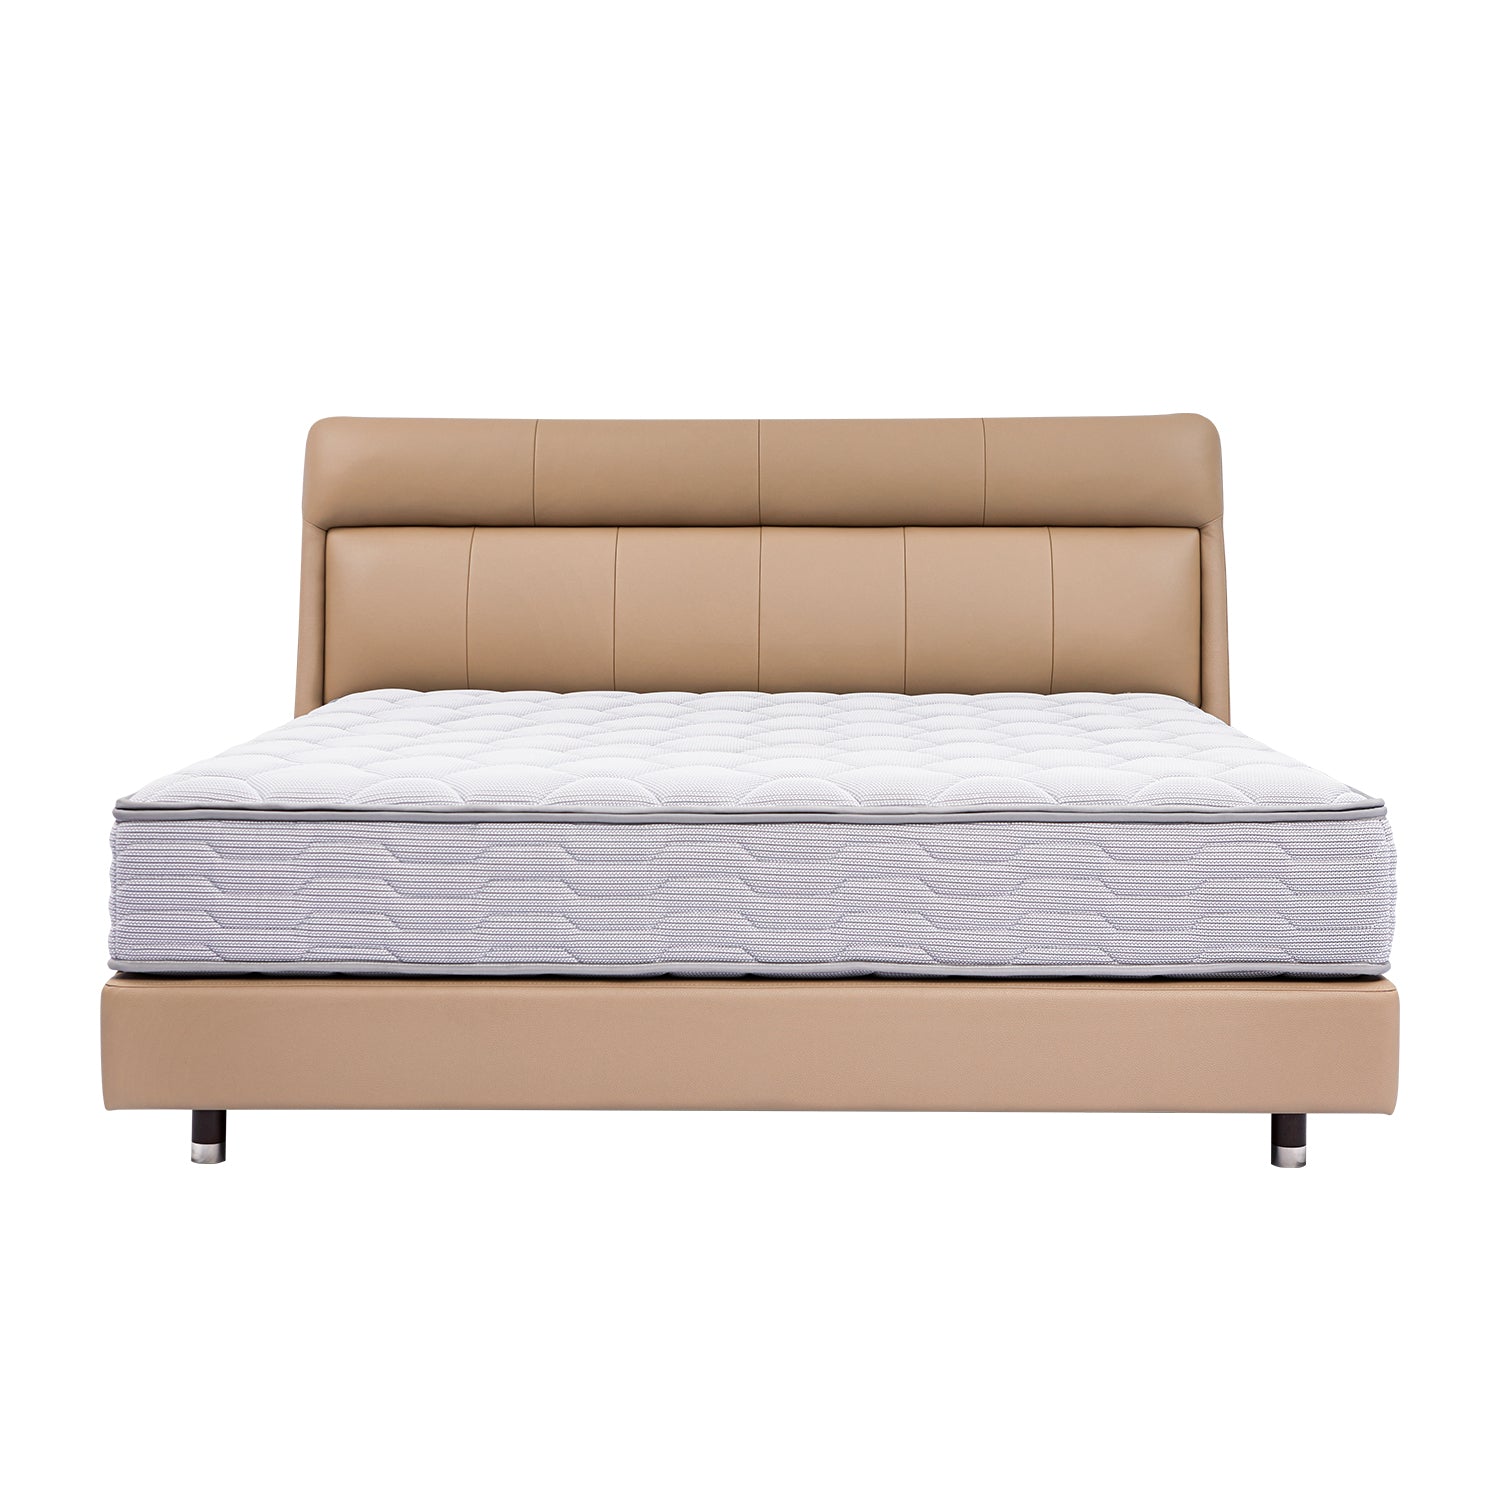 Beige leather bed frame with padded headboard and white quilted mattress, suitable for bedrooms with modern decor